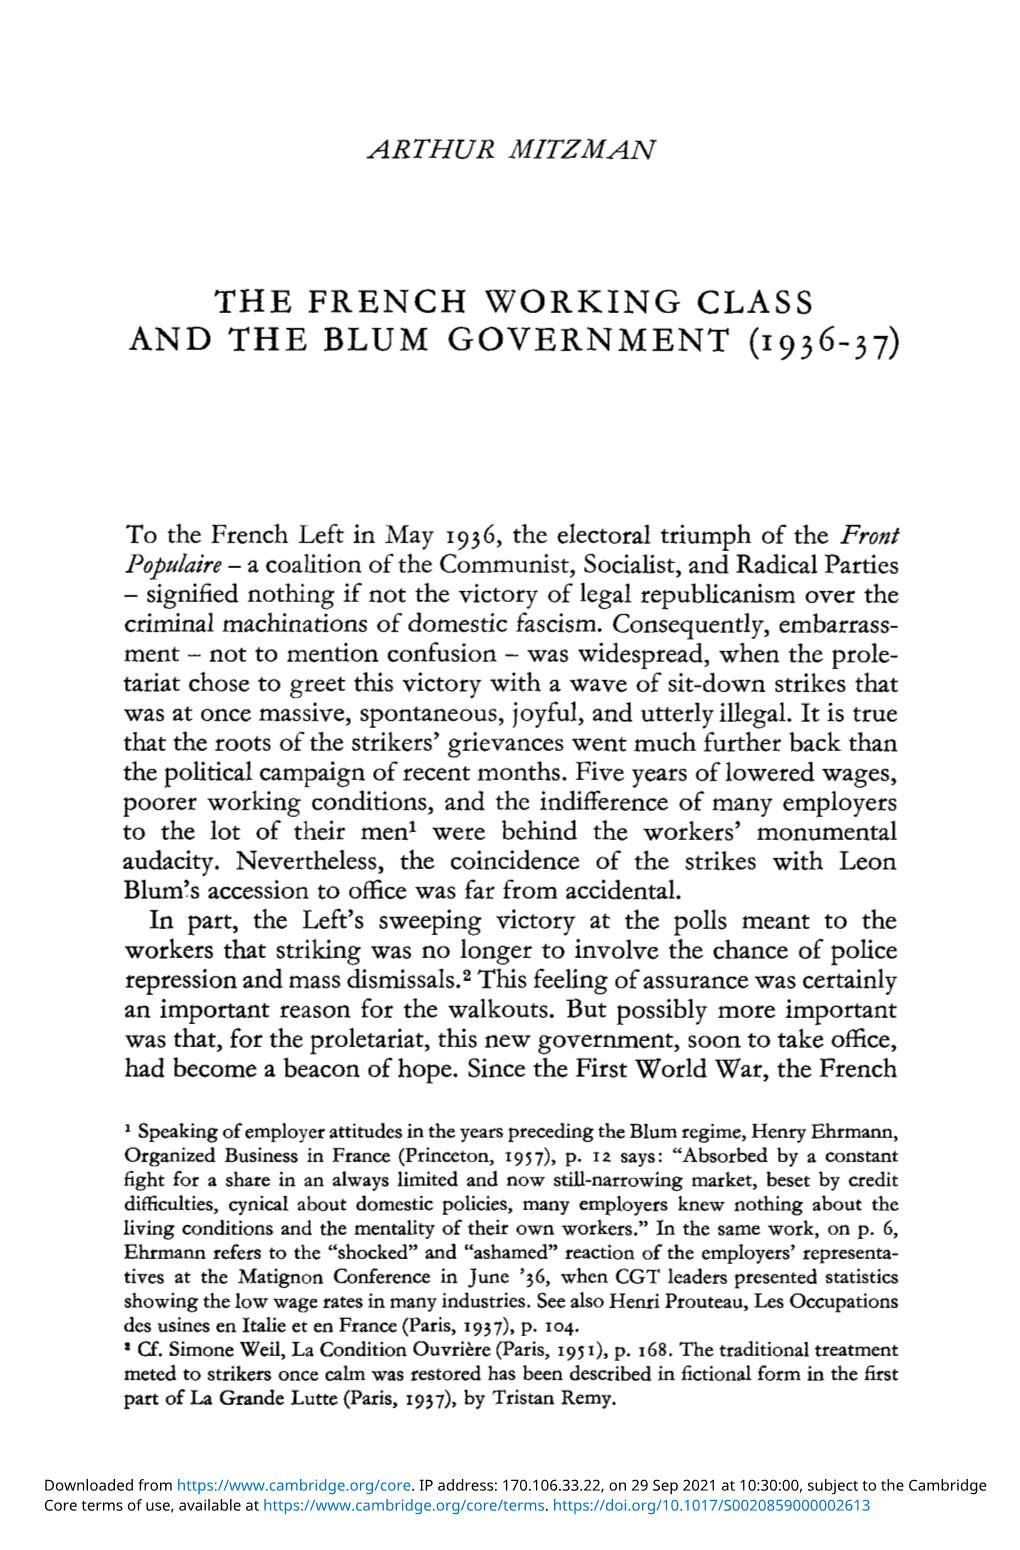 The French Working Class and the Blum Government (1936-37)